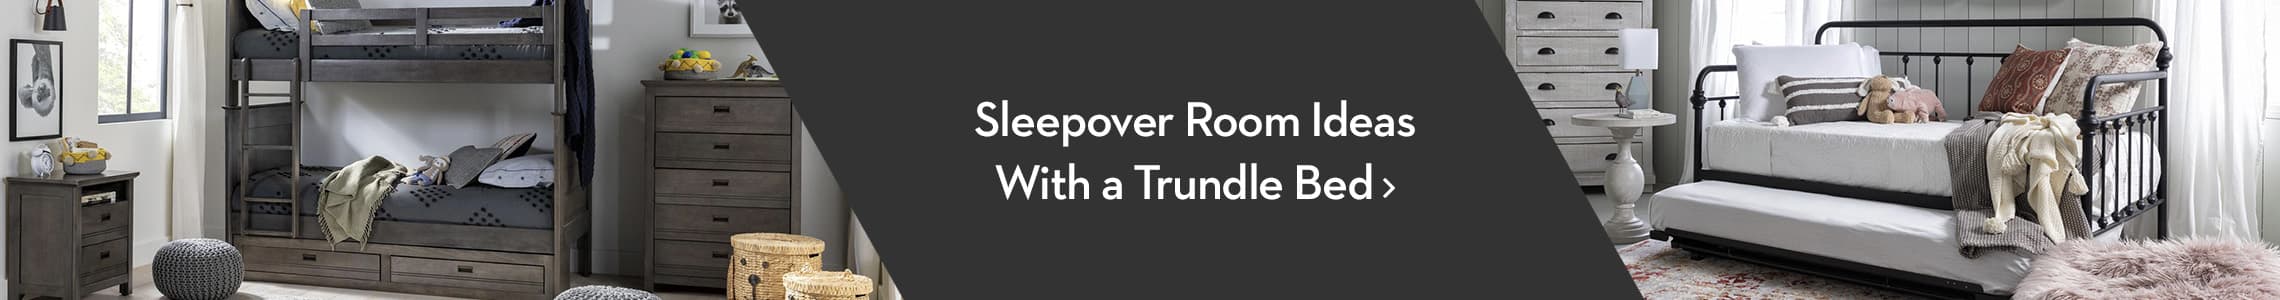 Sleepover Room Ideas with a Trundle Bed